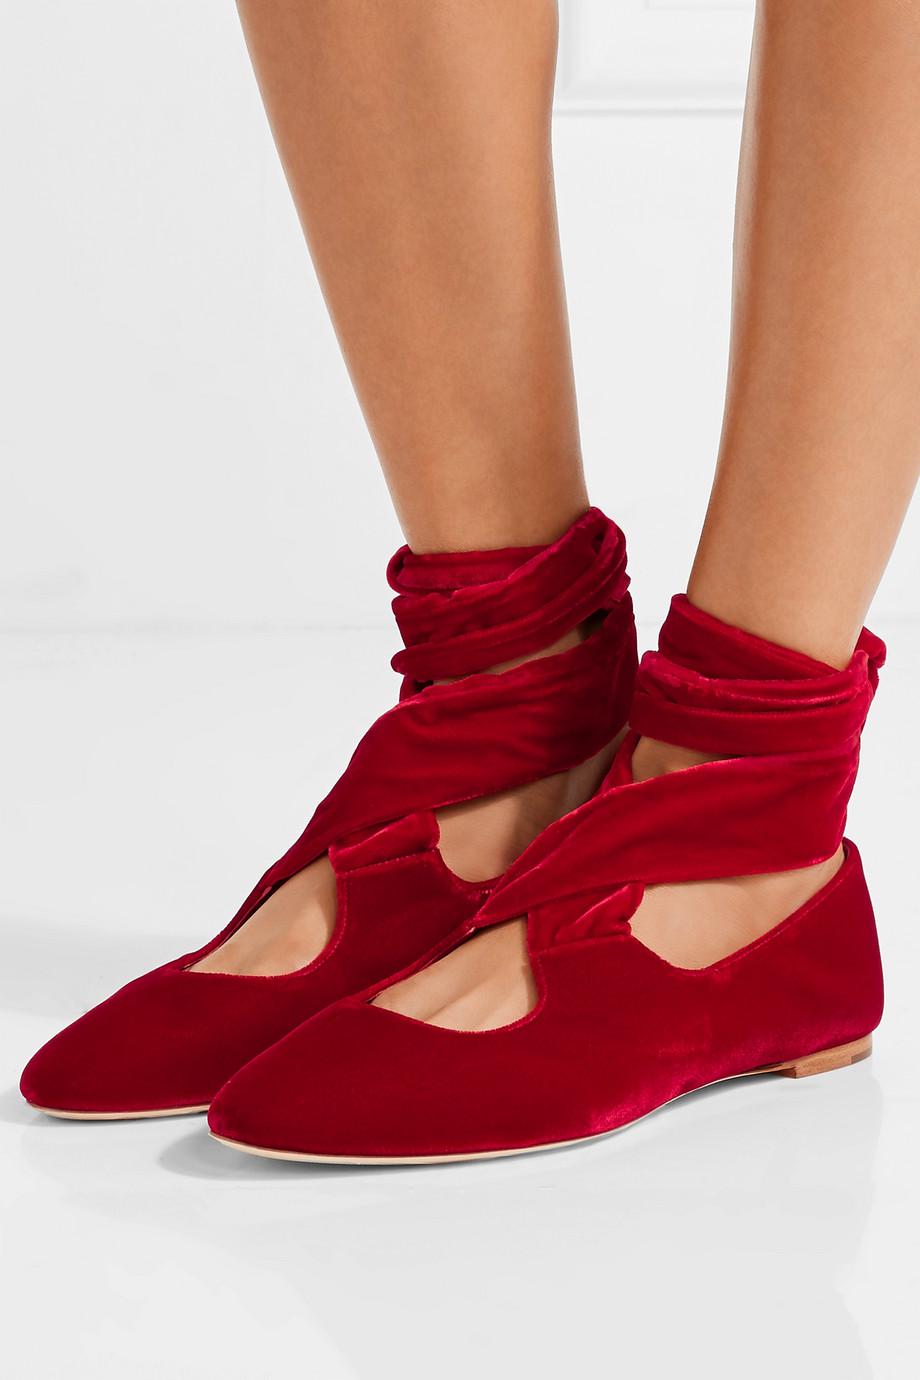 The Row Elodie Velvet Flats W/ Tags in Red | Lyst